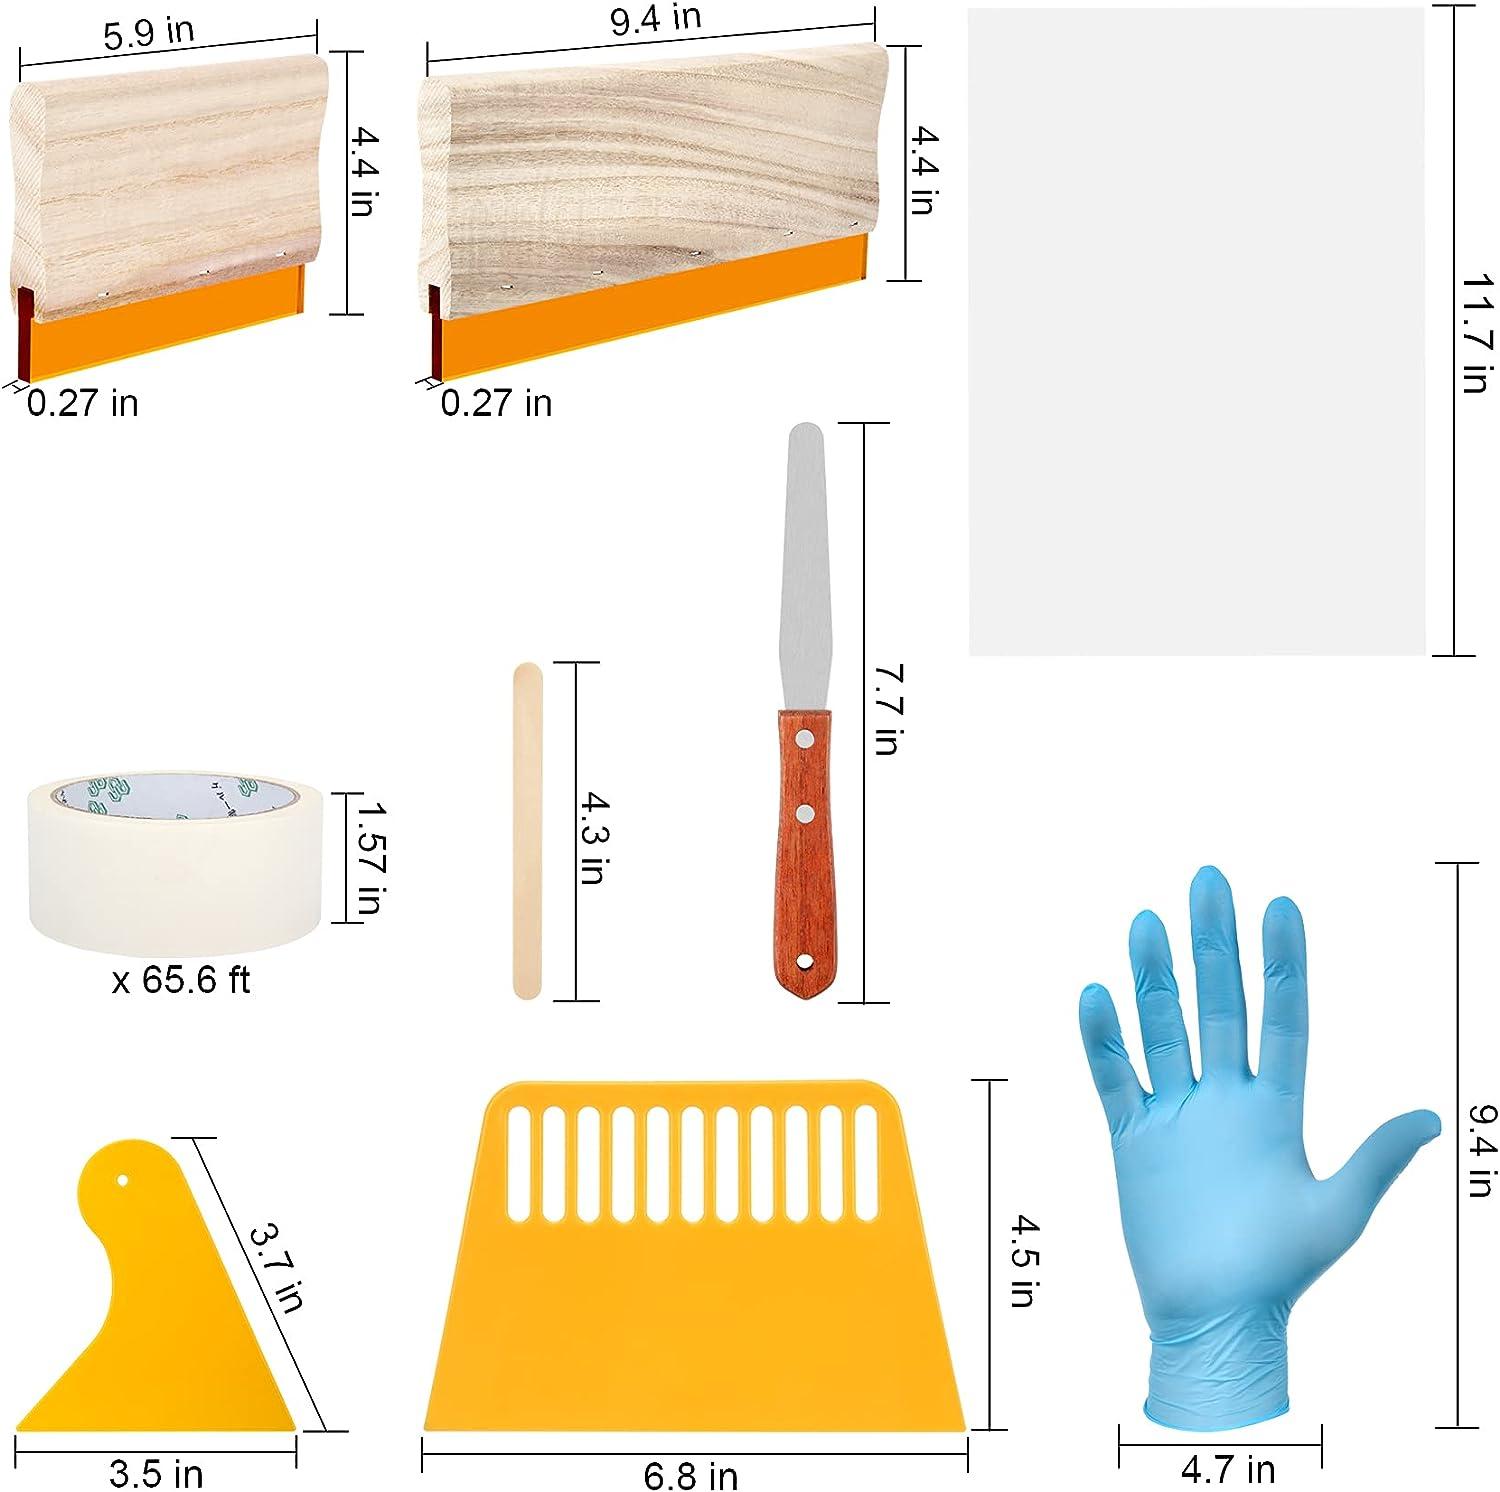 Colovis 30 PCS Screen Printing Kit for Home or Small Business, Include 3Pcs Screen  Printing Frames with Mesh, 2 Pcs Squeegees, 5 Pcs Inkjet Transparency Film,  Masking Tape, etc